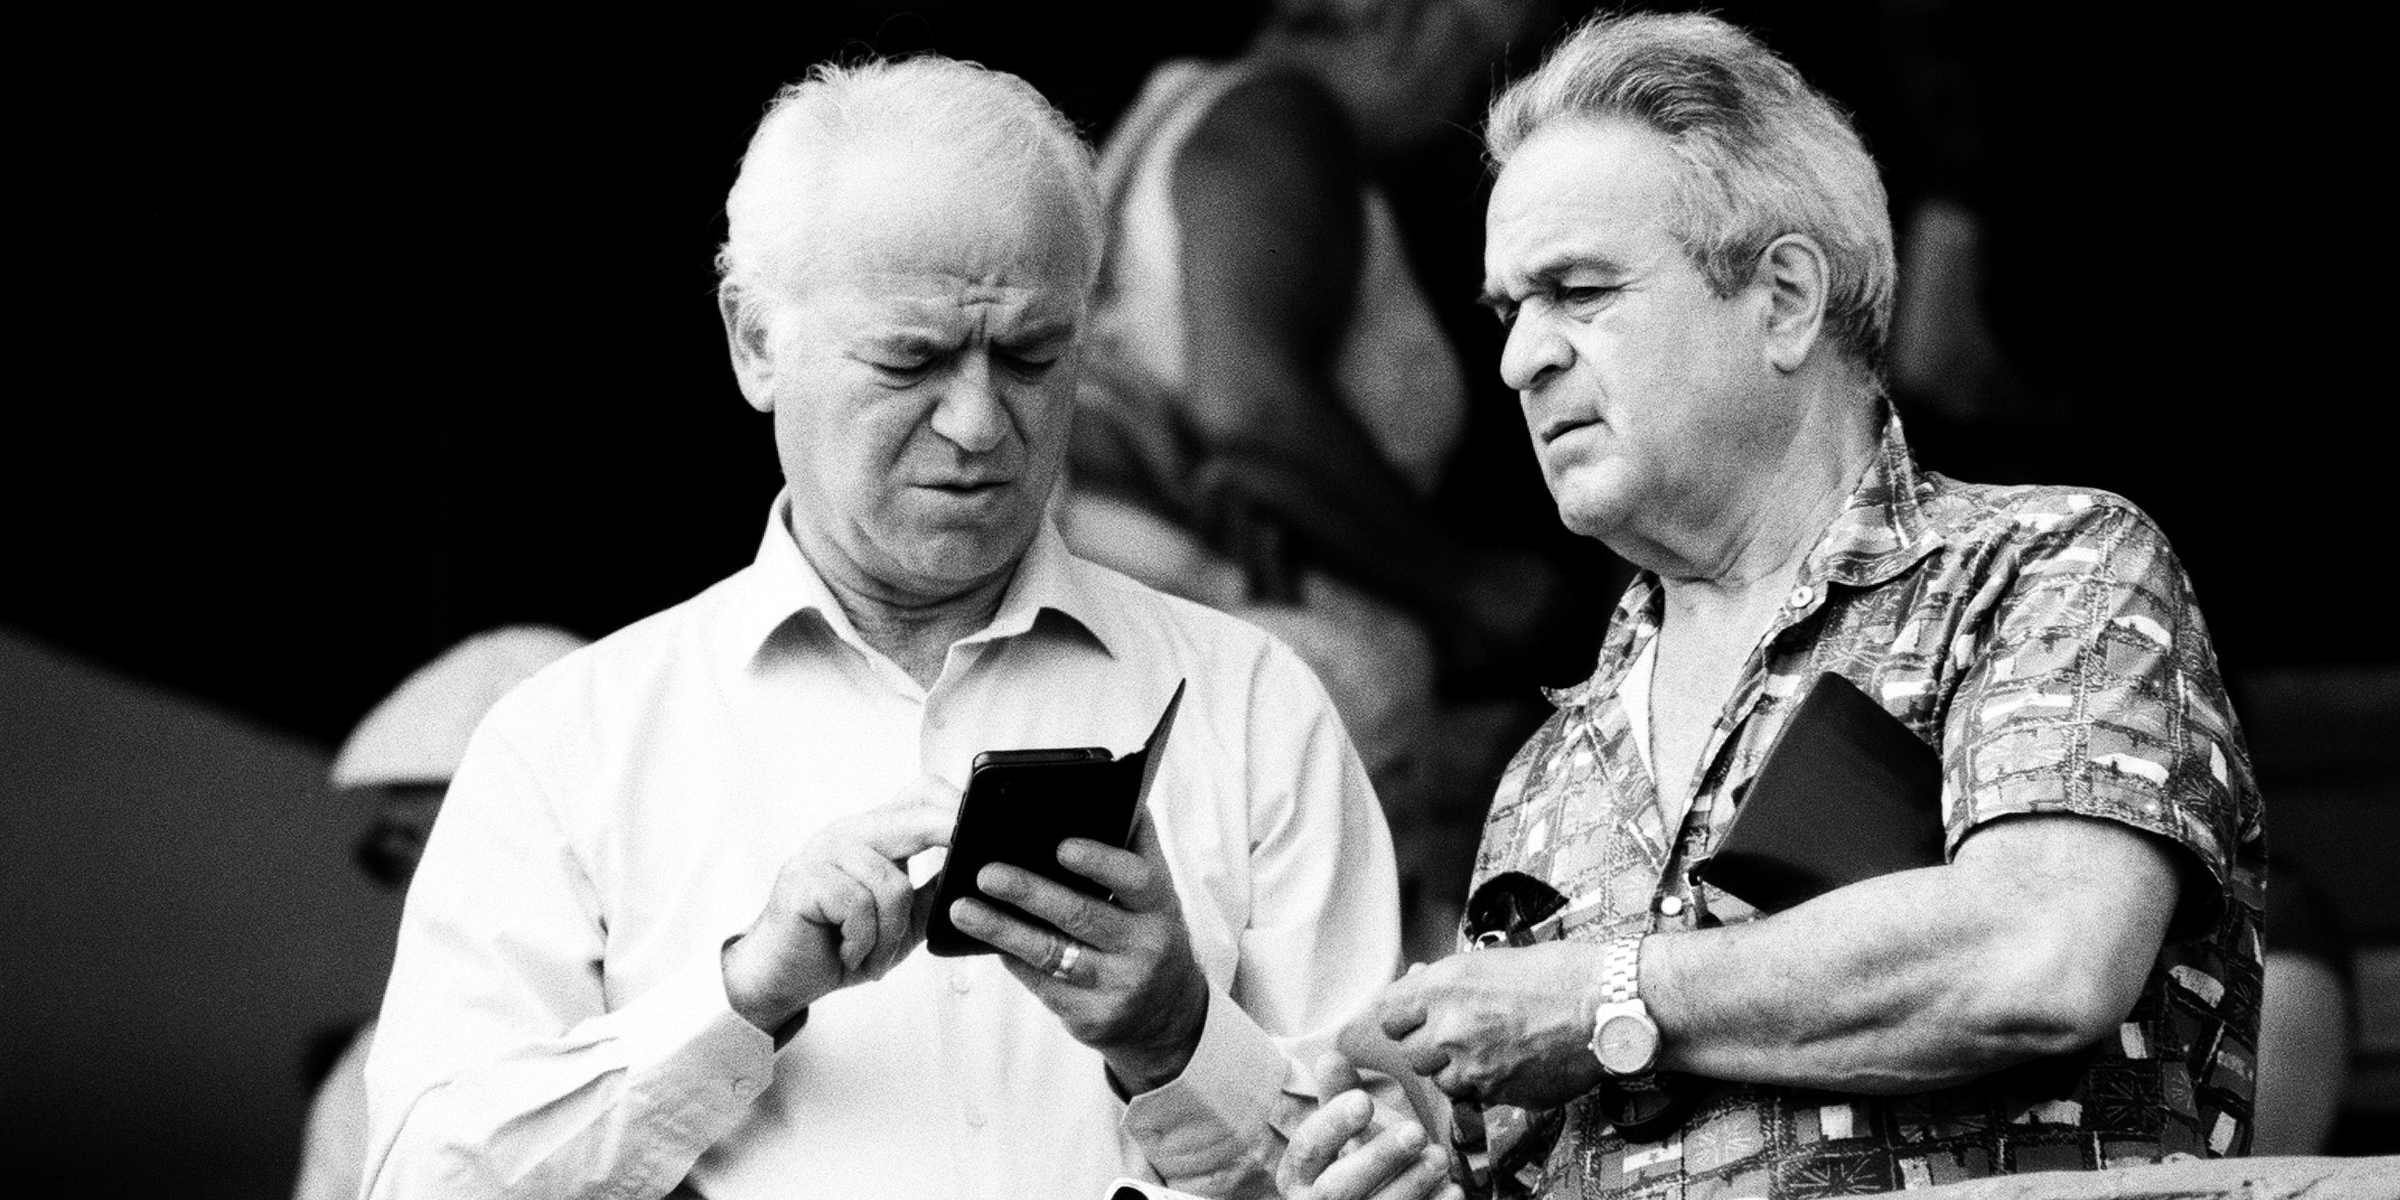 Healthcare must include texting the older population